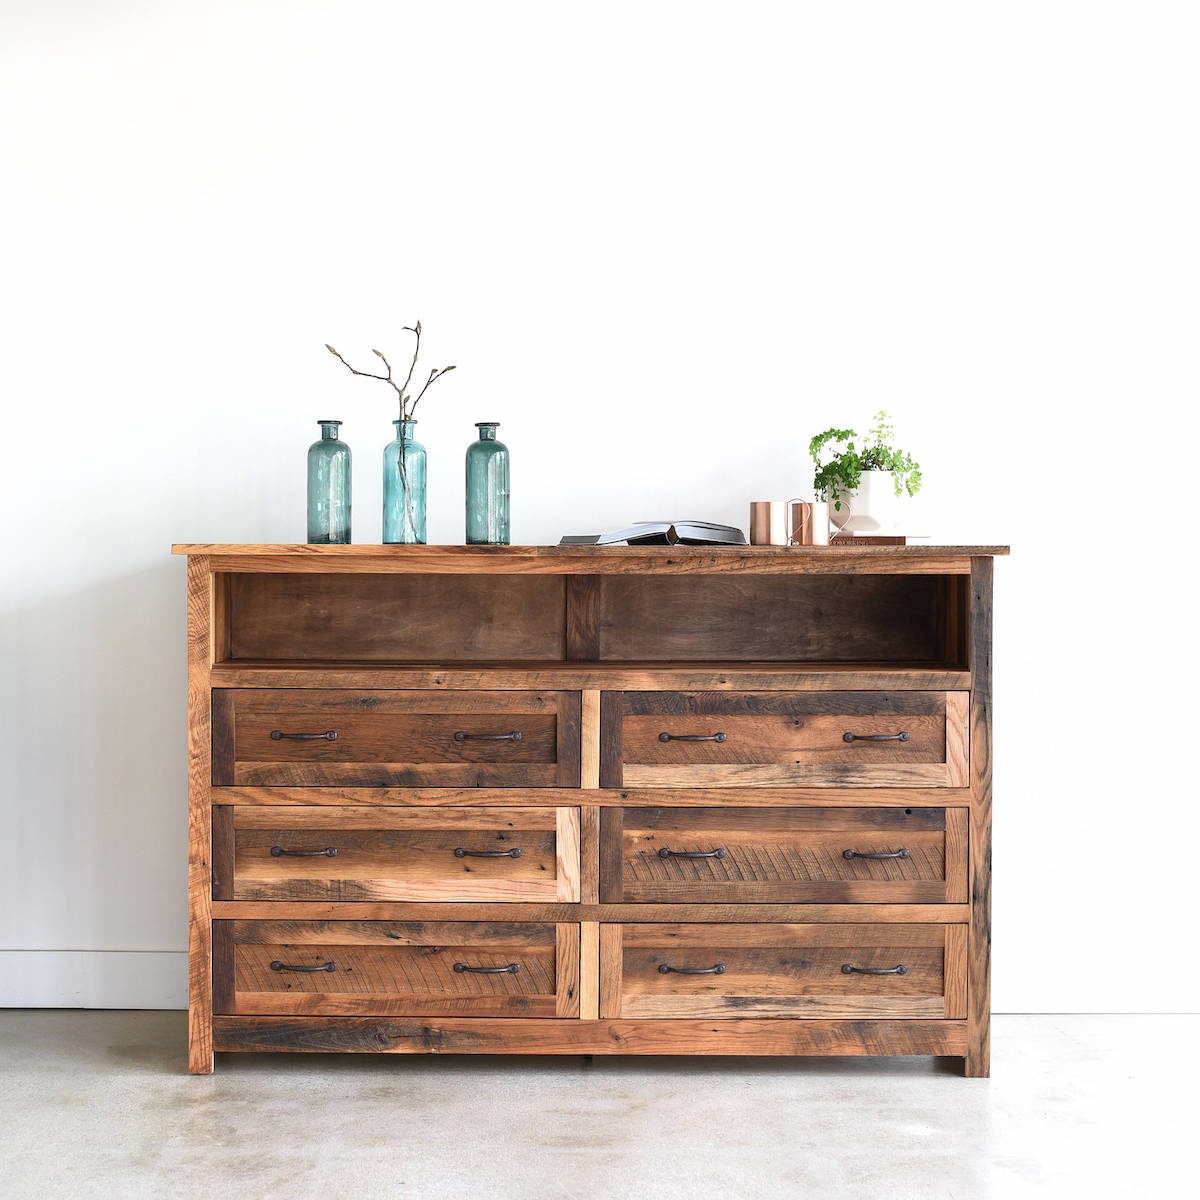 Reclaimed wood dresser from What WE Make